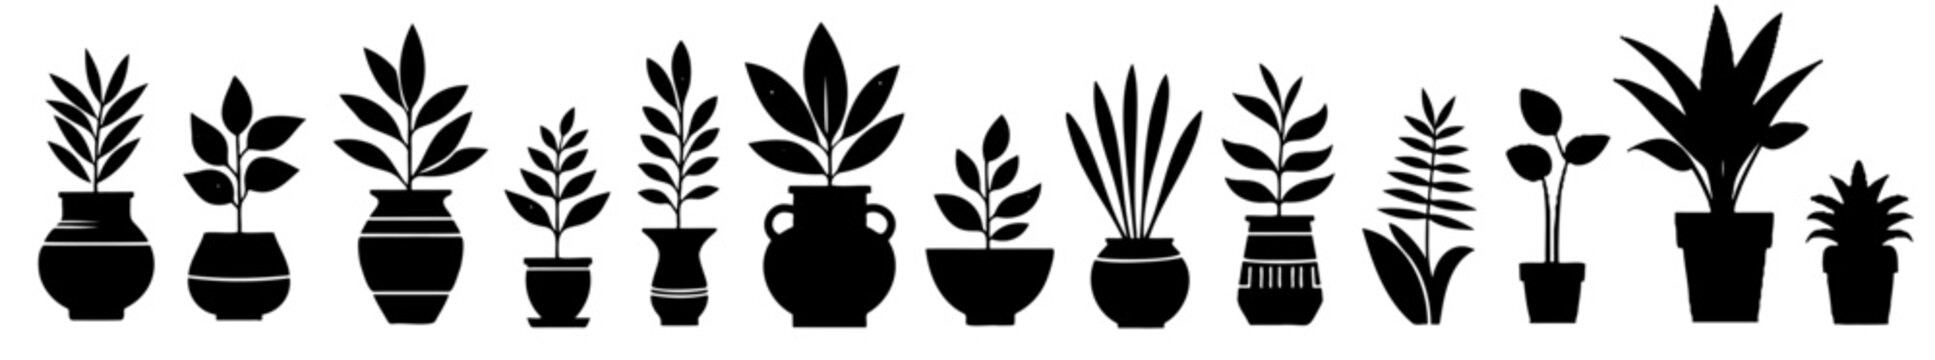 Houseplants. Vector set silhouettes home plants, succulents in pot. Indoor exotic flowers with stems and leaves. Monstera, ficus, pothos, yucca, dracaena, cacti, snake plant for home and interior